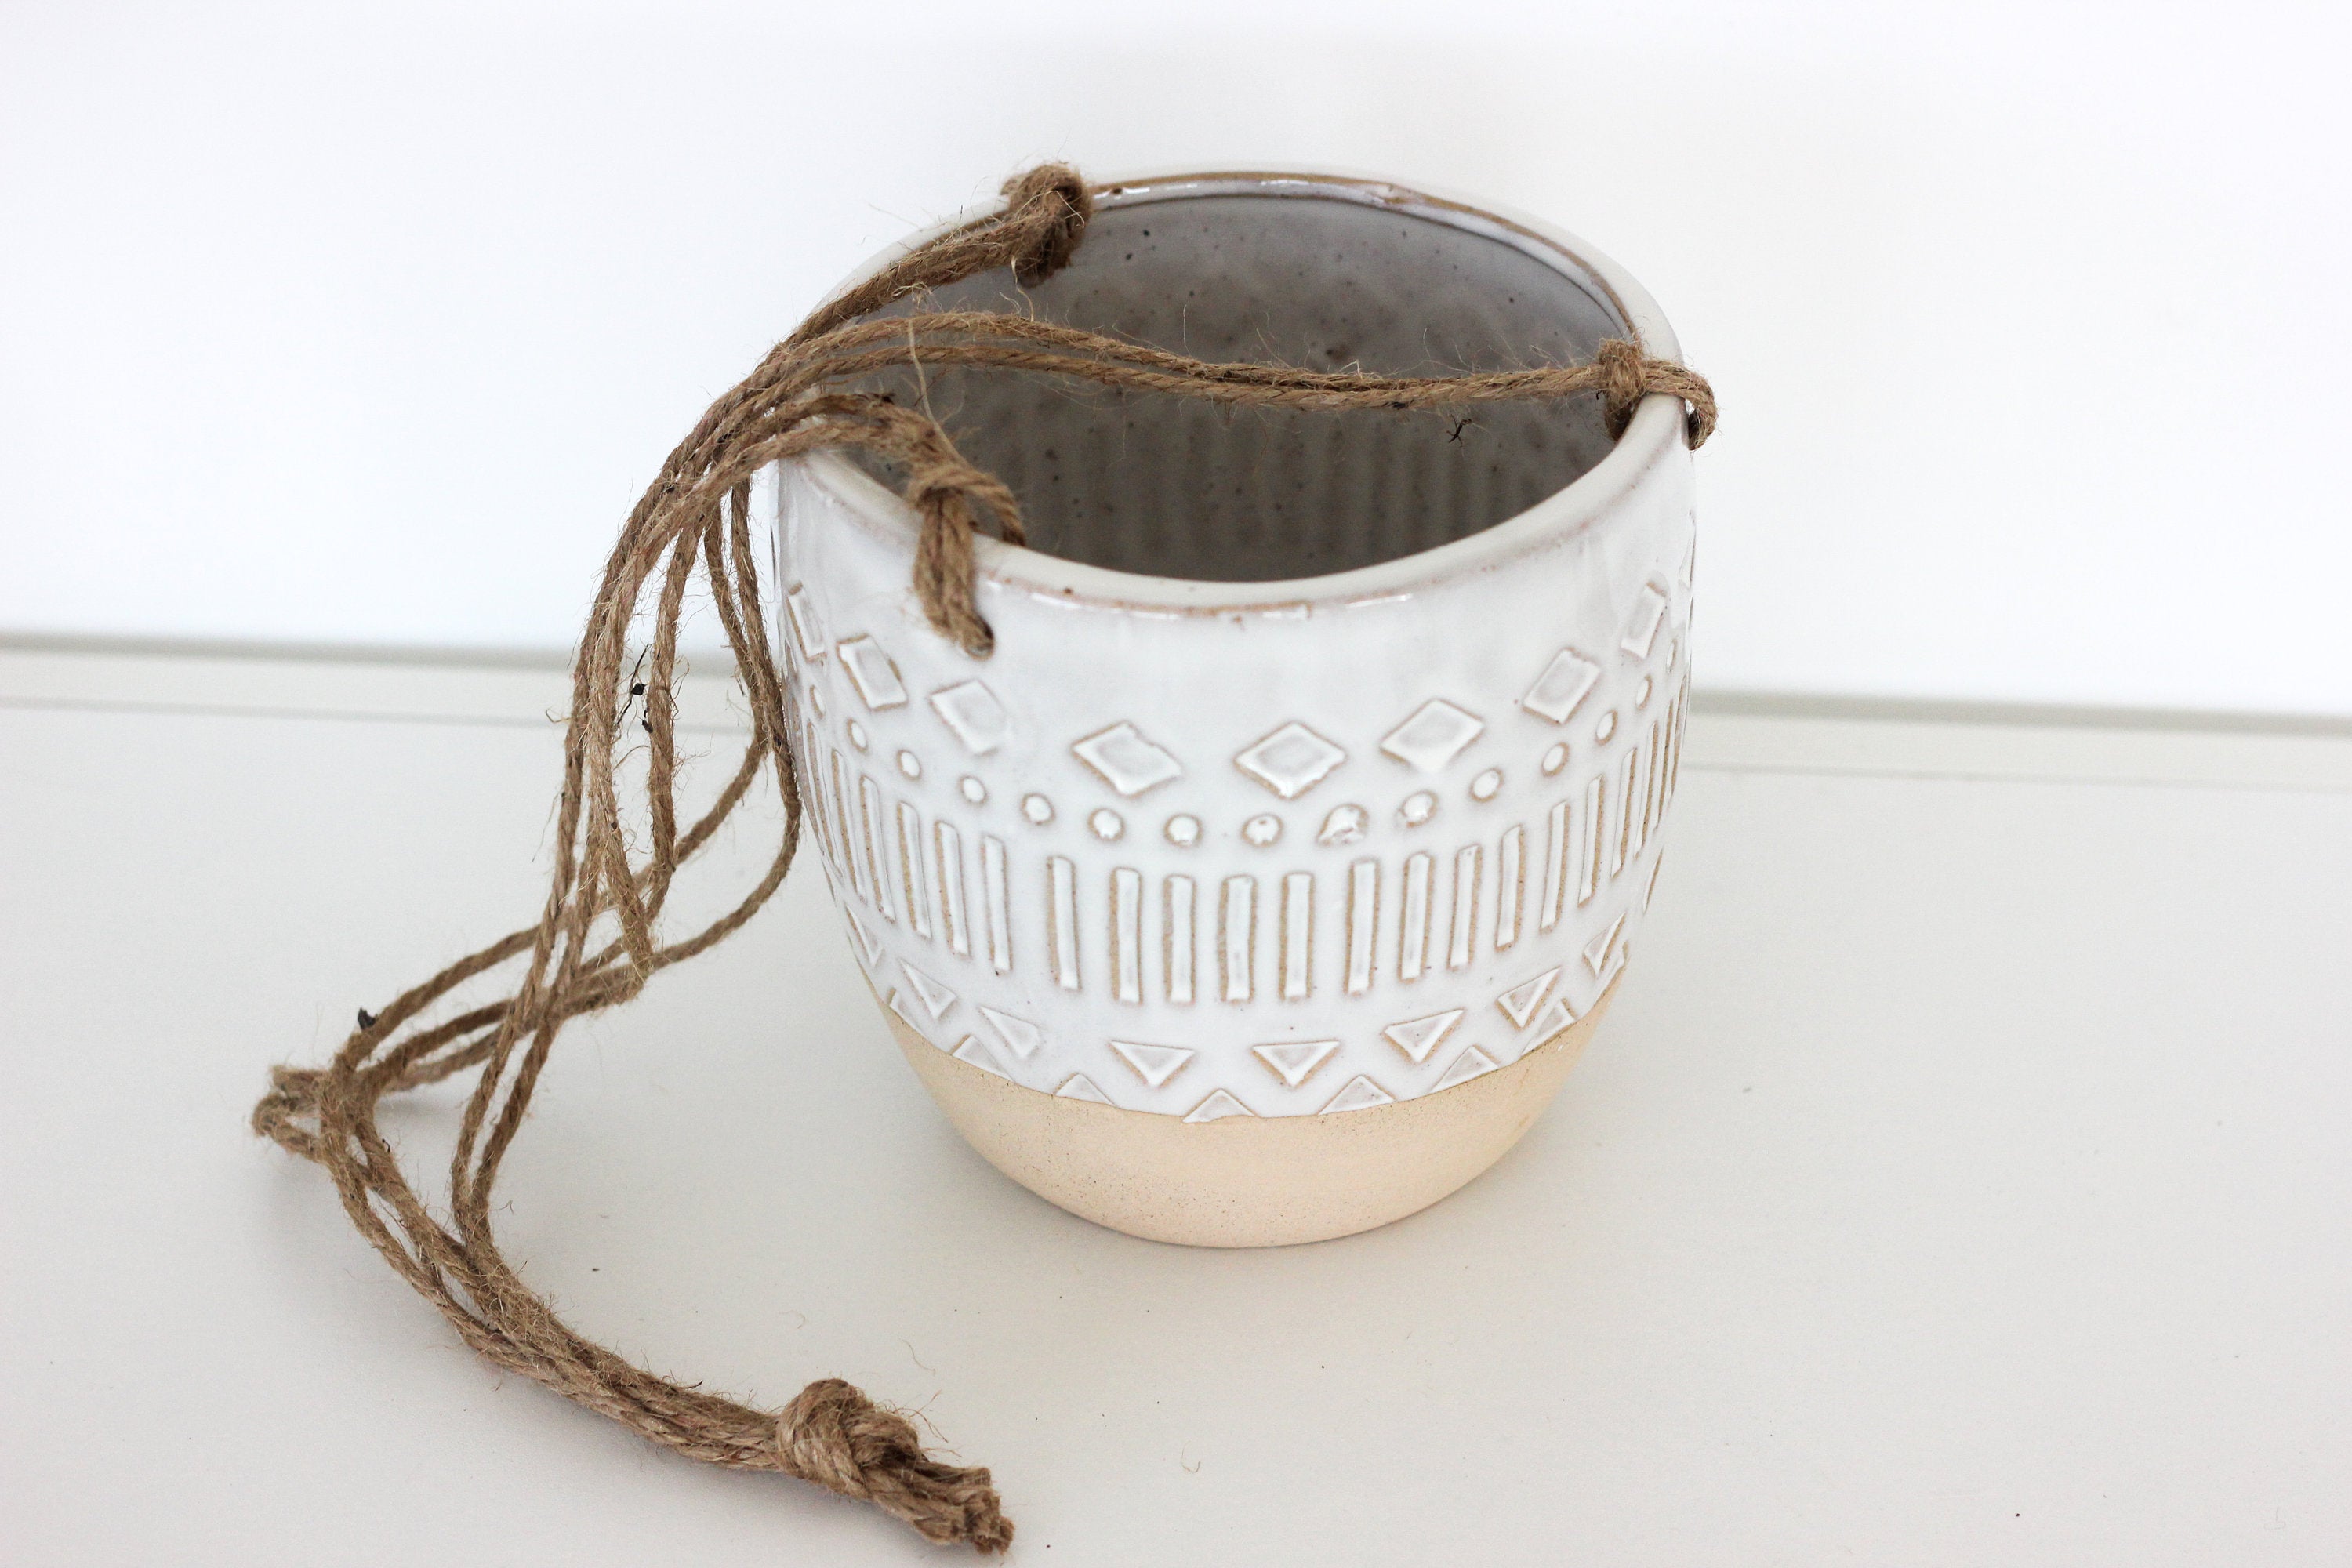 Patterned Ceramic White and Beige Hanging Planter Pot